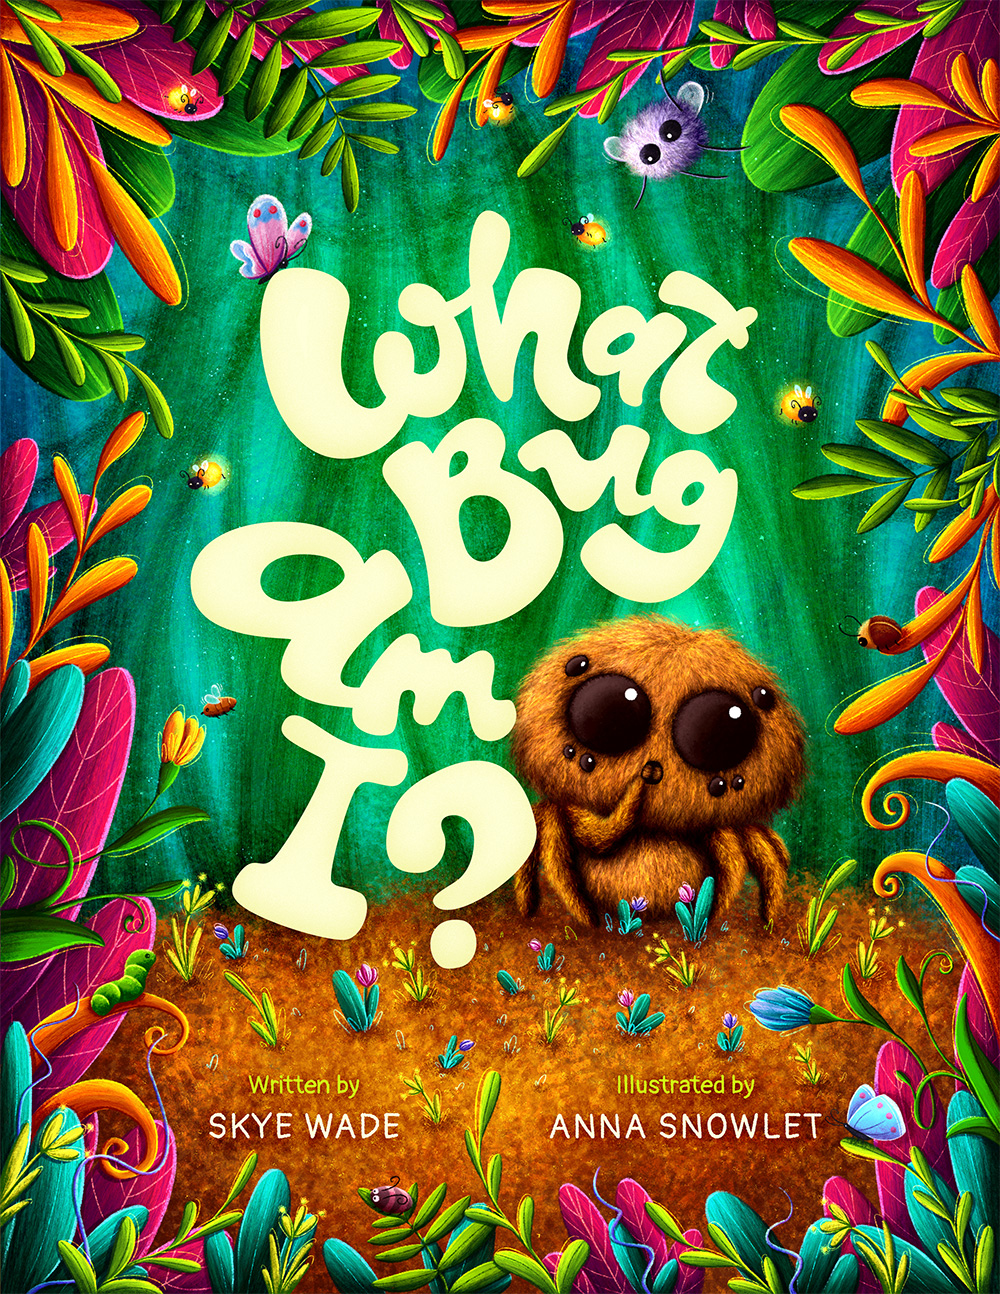 FREE: What Bug Am I?: A Funny, Educational Story about Backyard Bugs. Bug Book for Kids with Insect Facts. by Skye Wade